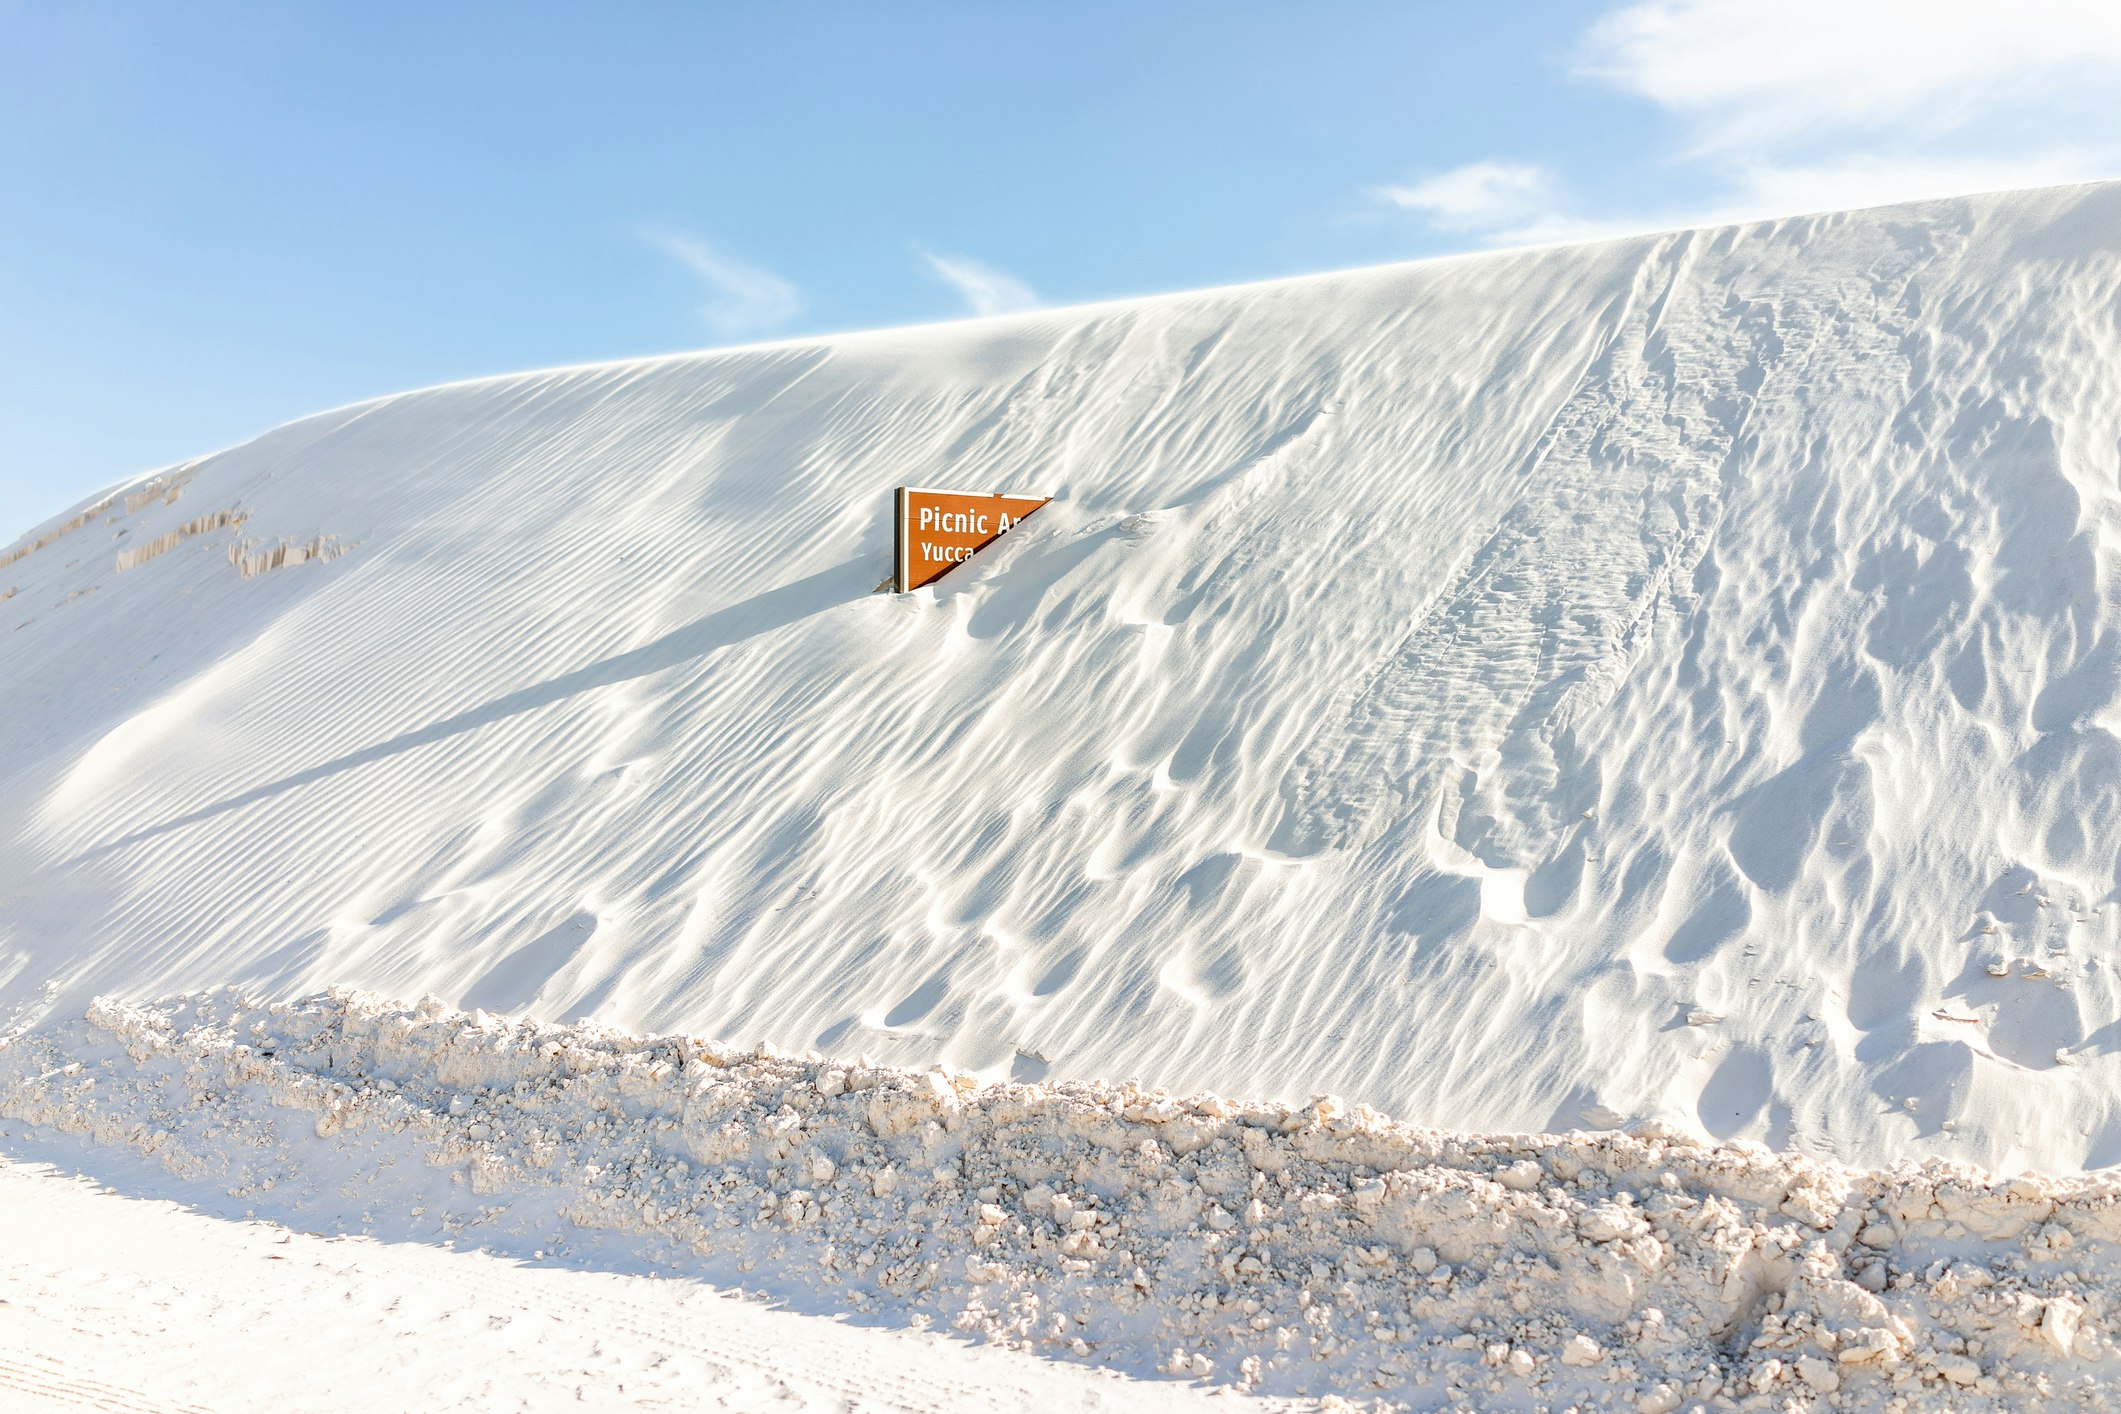 A brown park sign indicating the Yucca Picnic Area is half-buried in a sugary sand dune at White Sands National Park in New Mexico